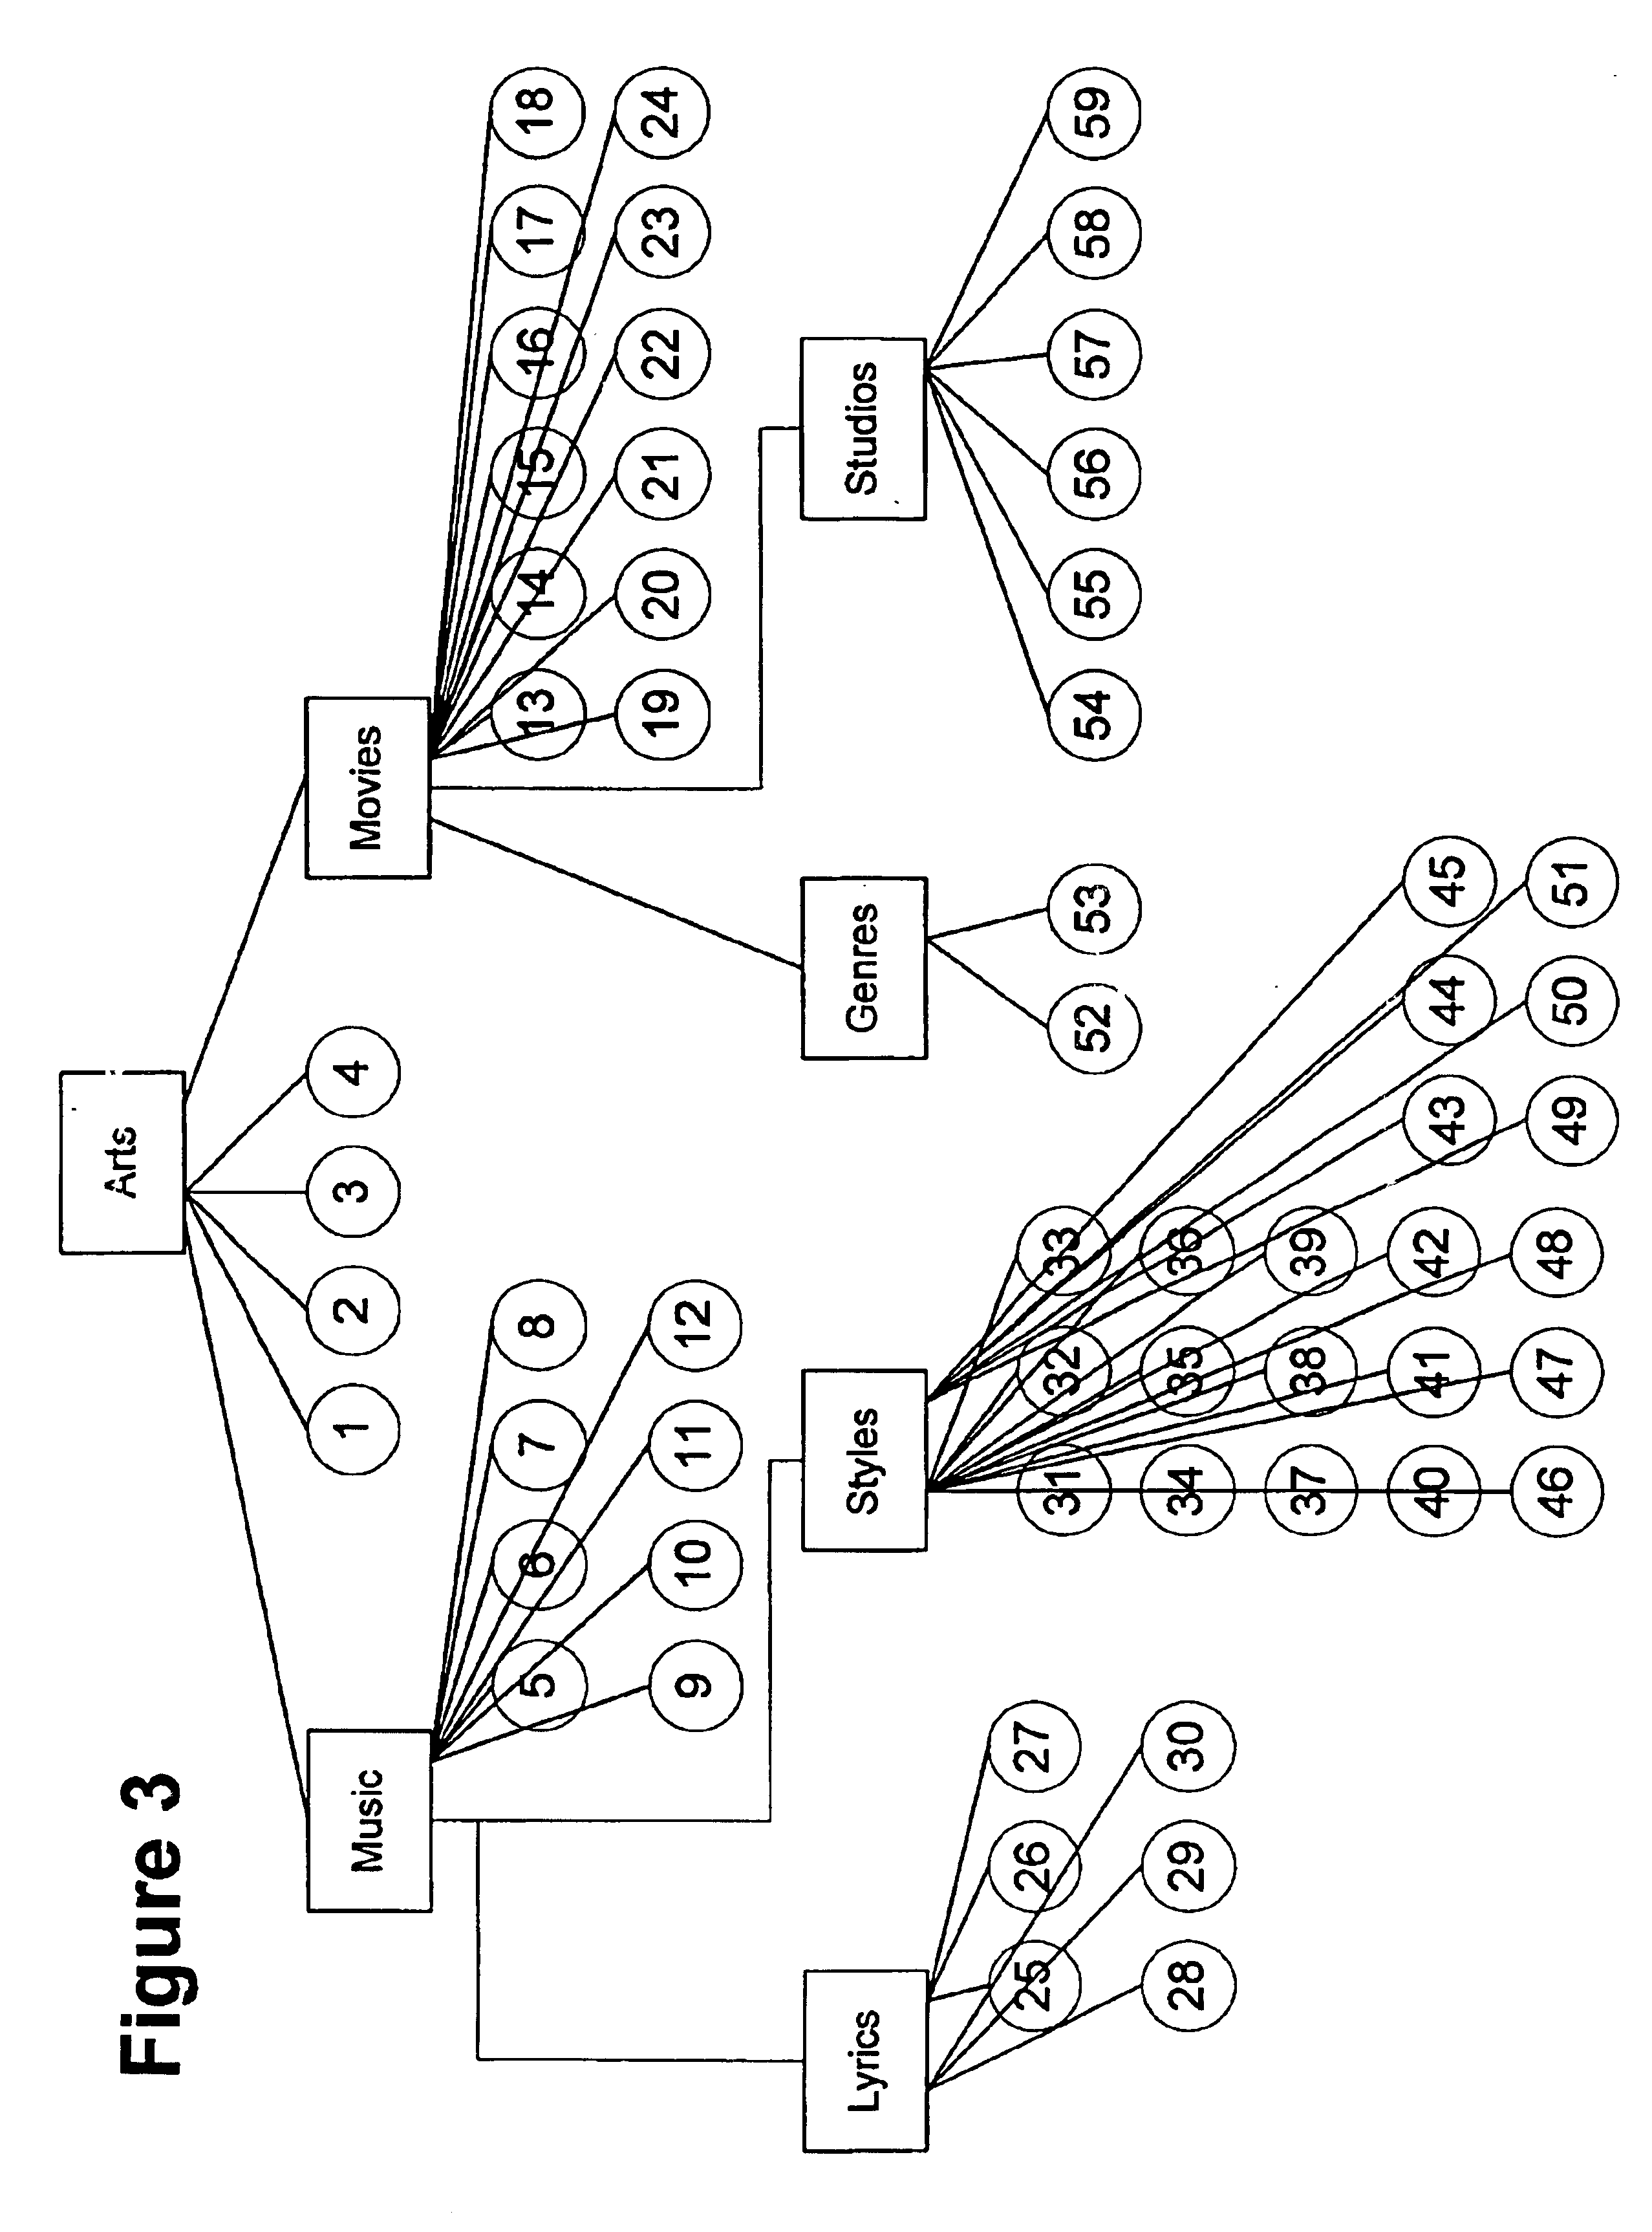 Method for describing objects in a virtual space